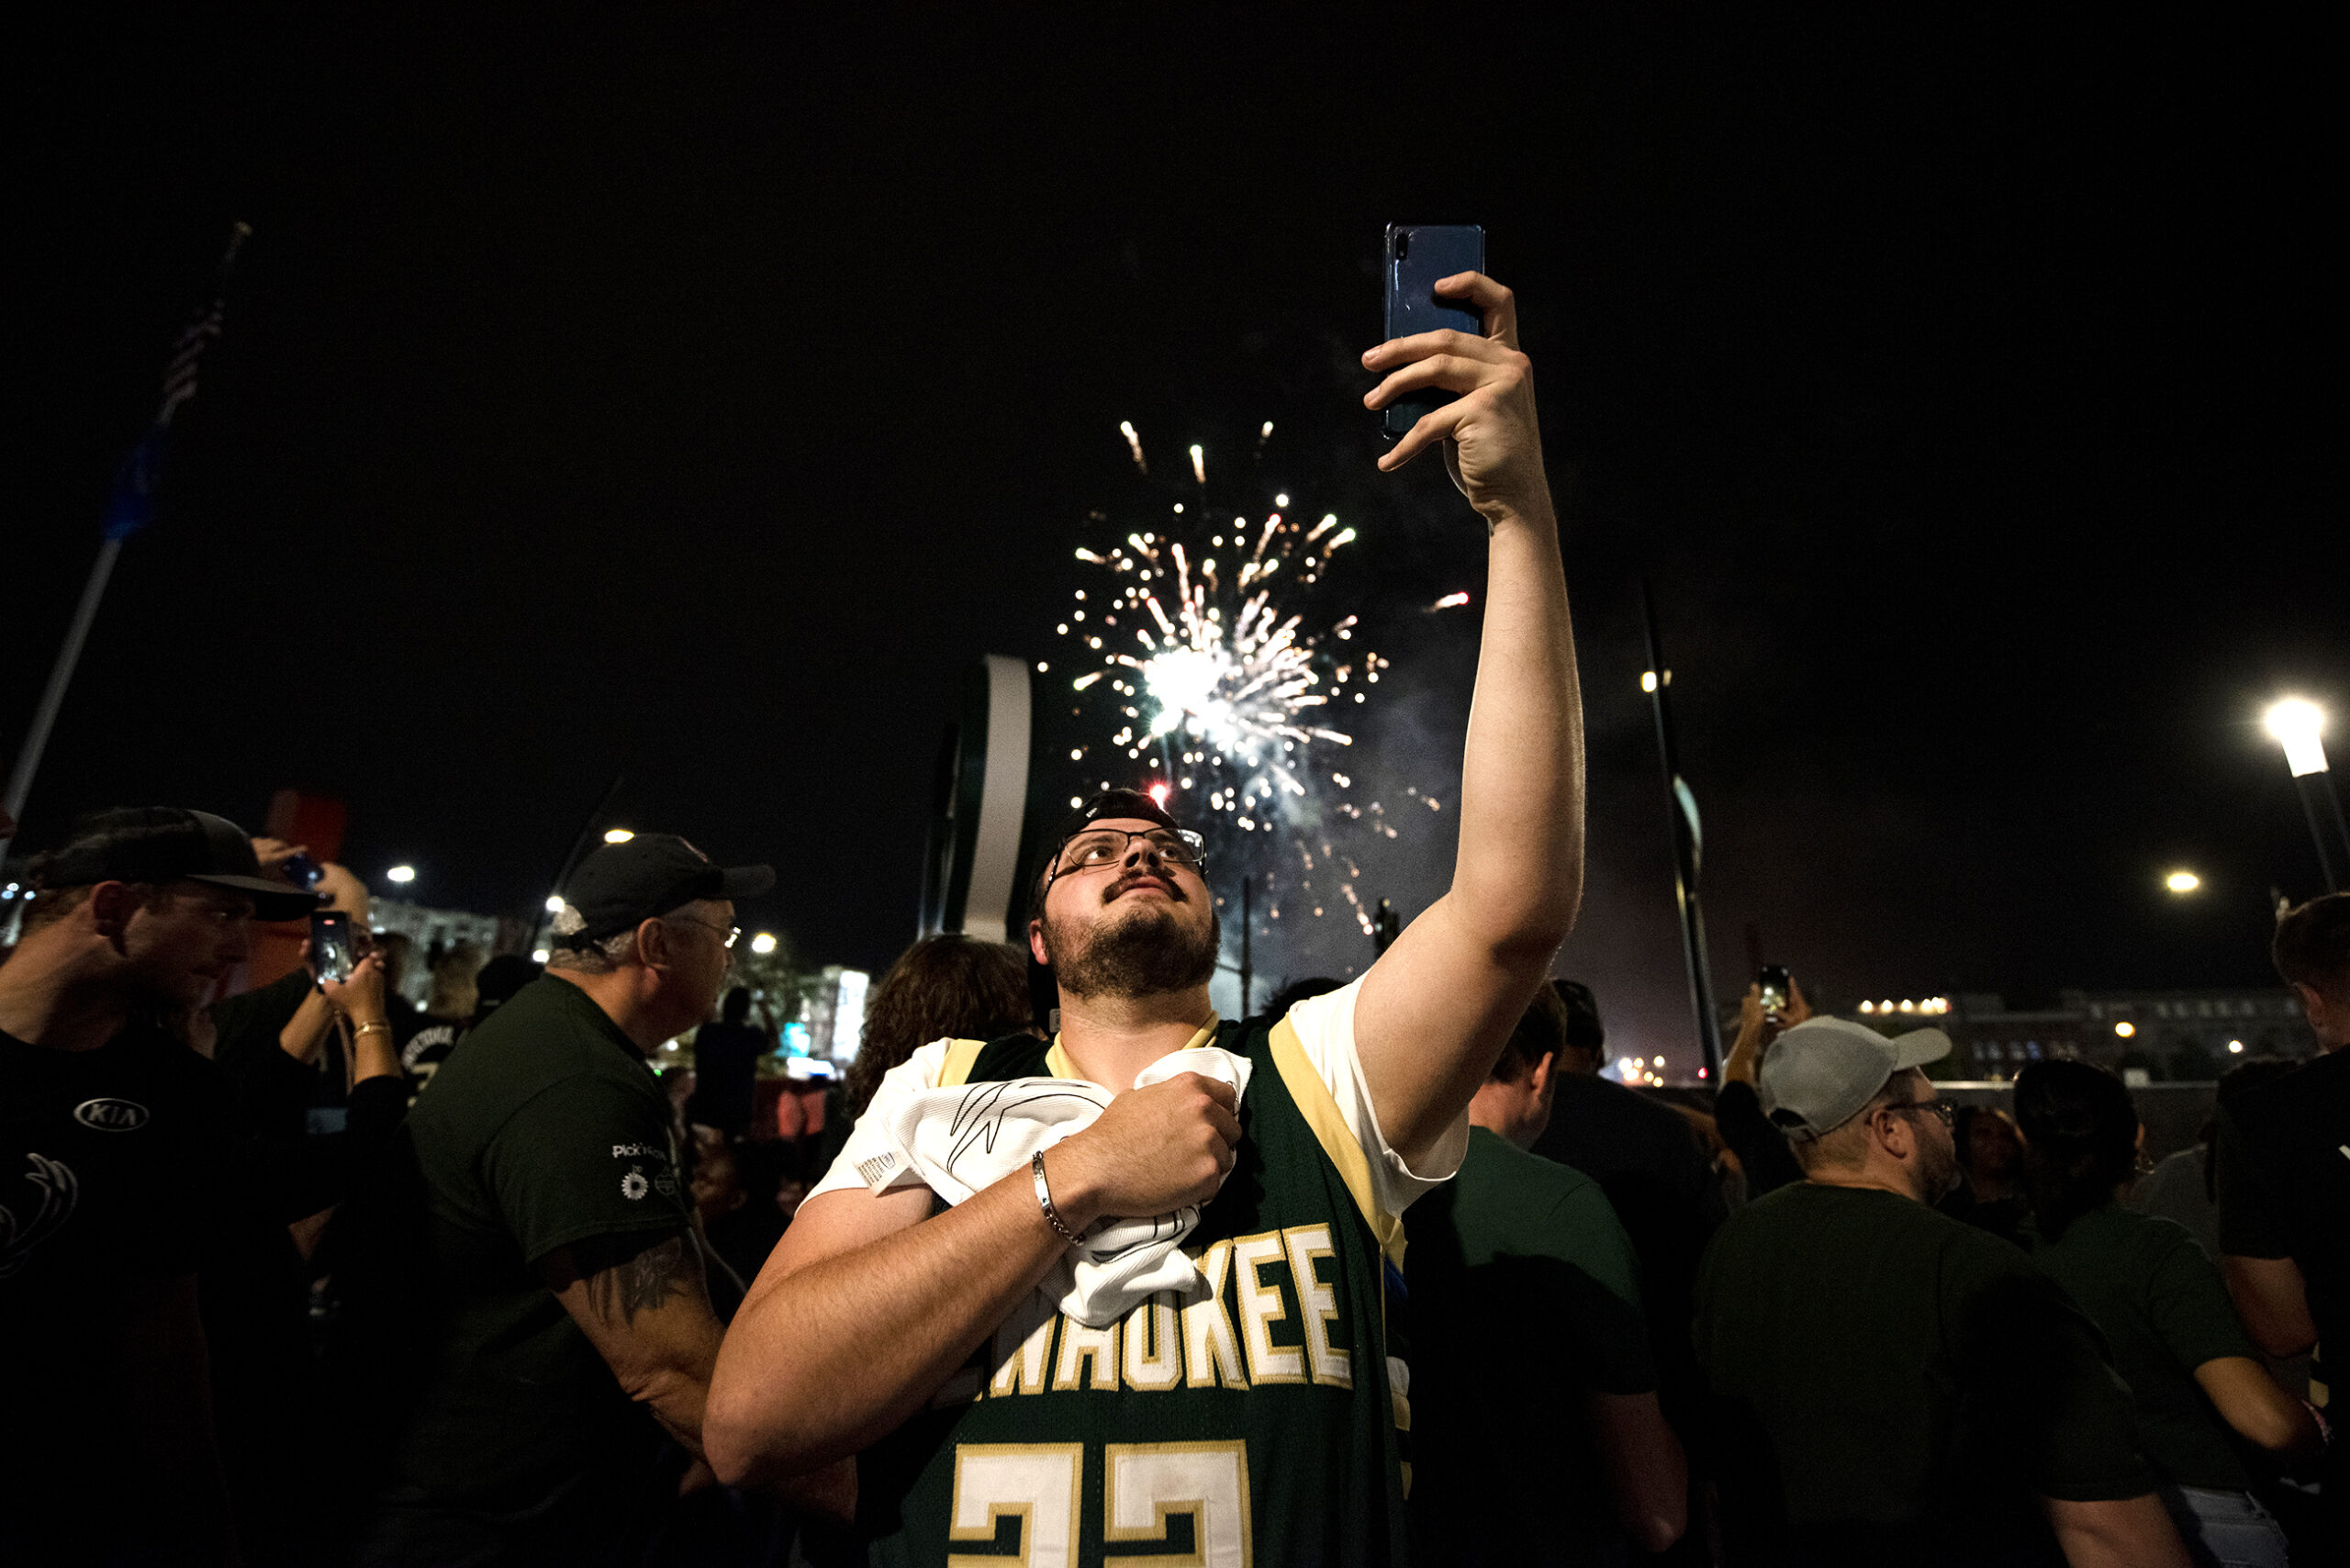 Photos: Bucks Fans Jubilant After Game 4 Victory